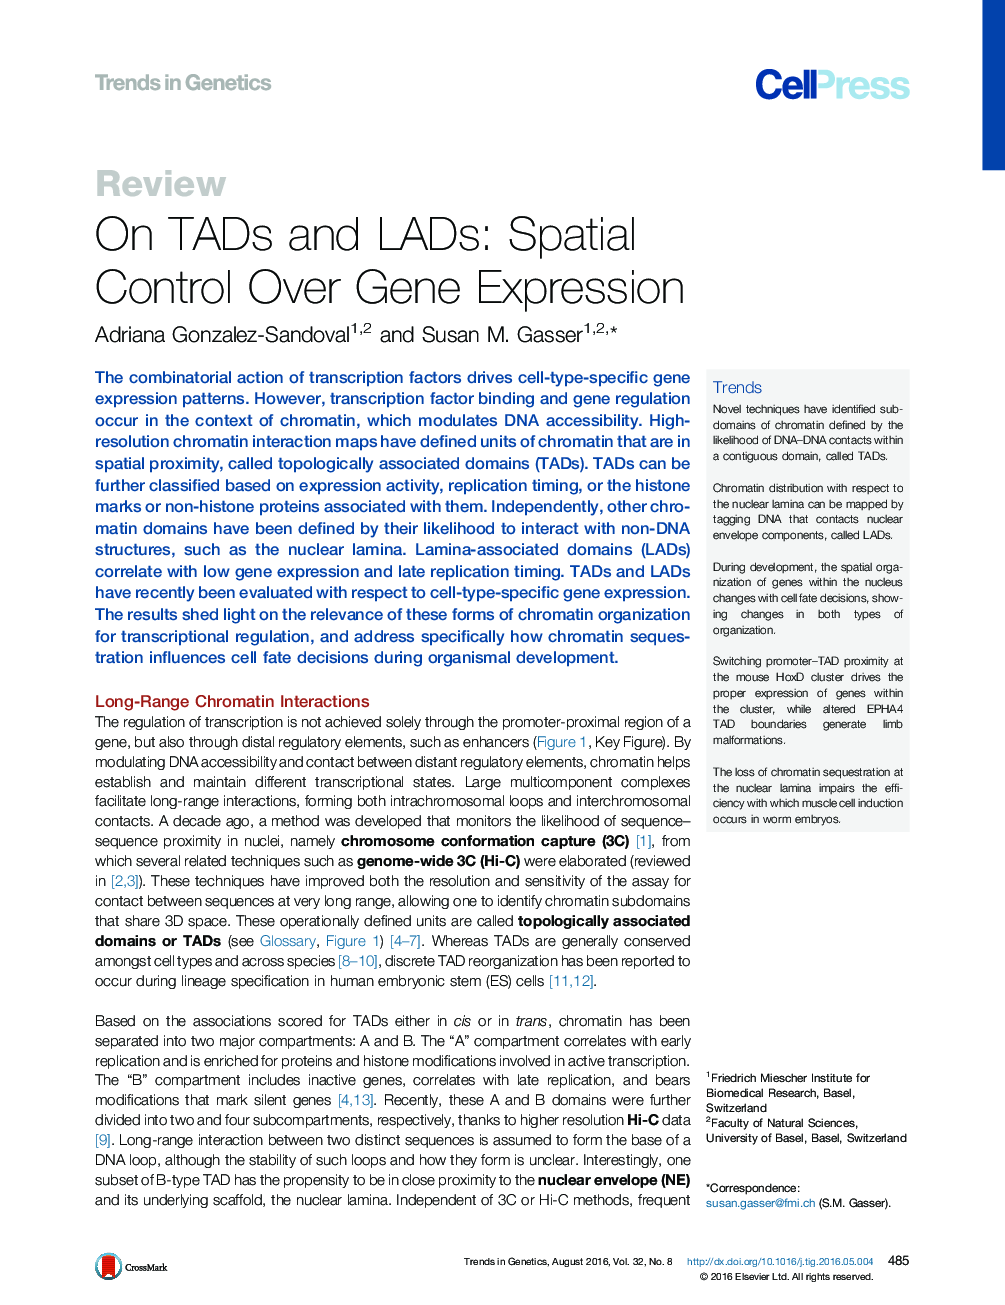 On TADs and LADs: Spatial Control Over Gene Expression